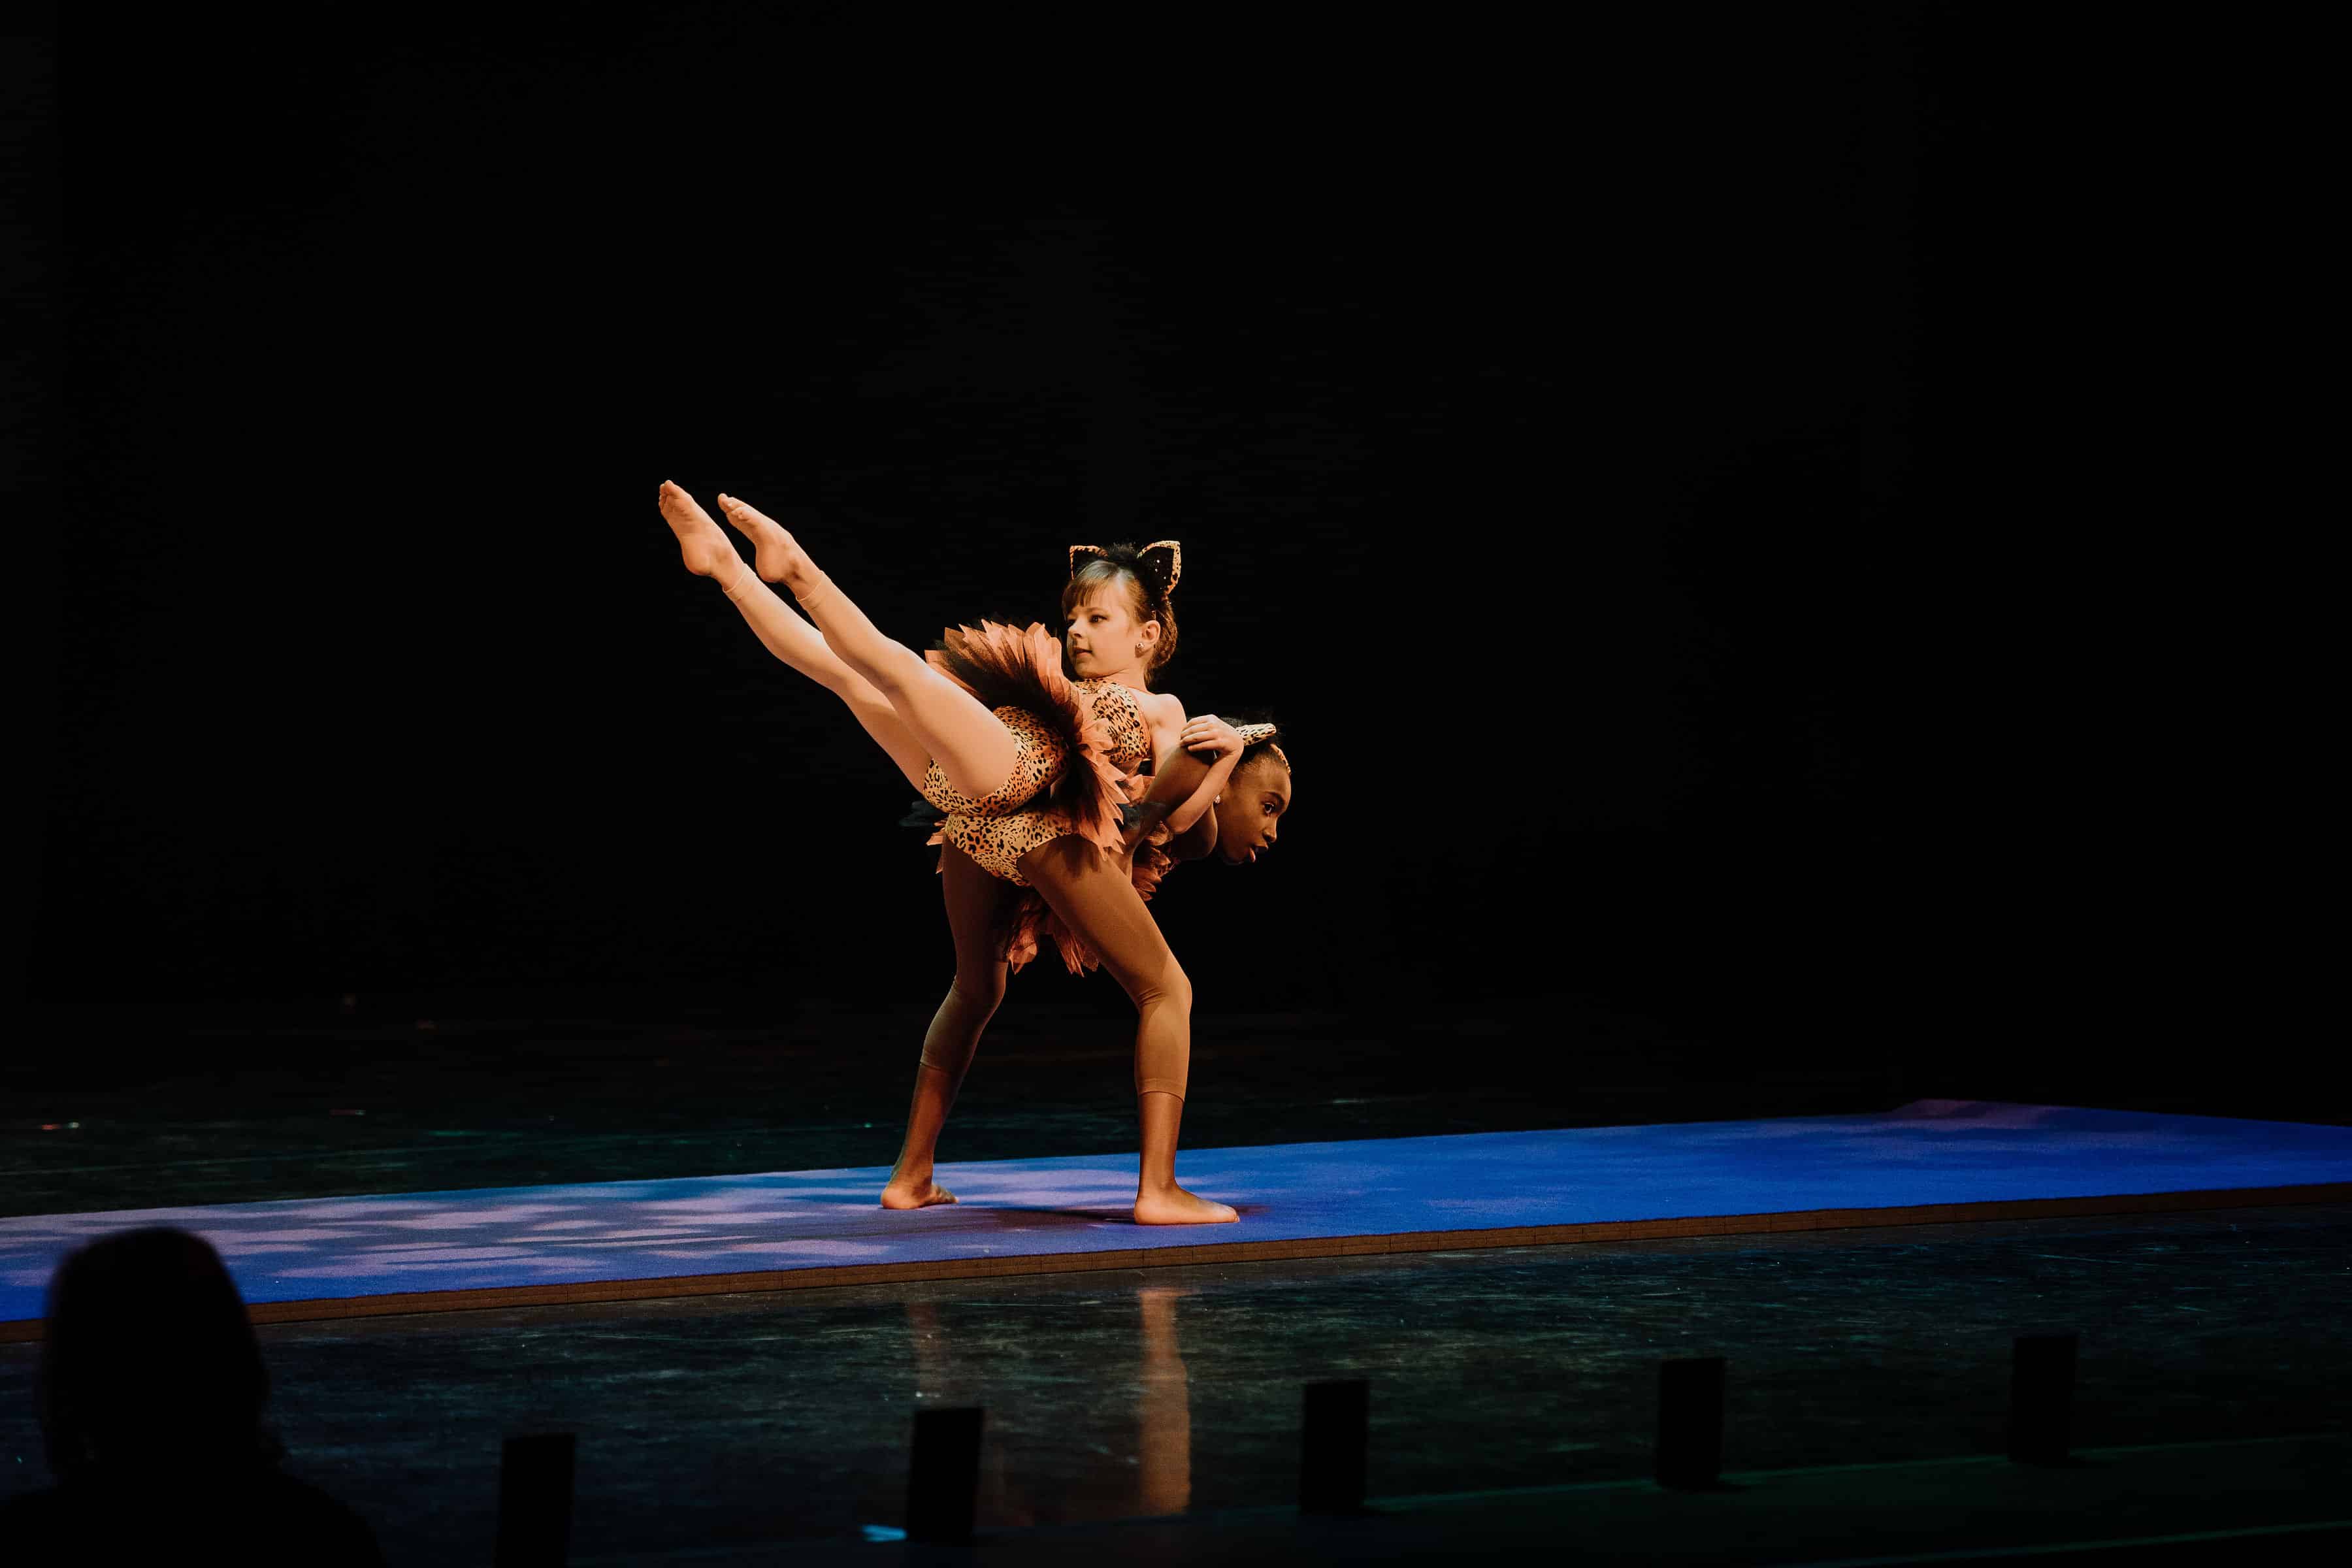 Two dancers performing an Acro routine on stage